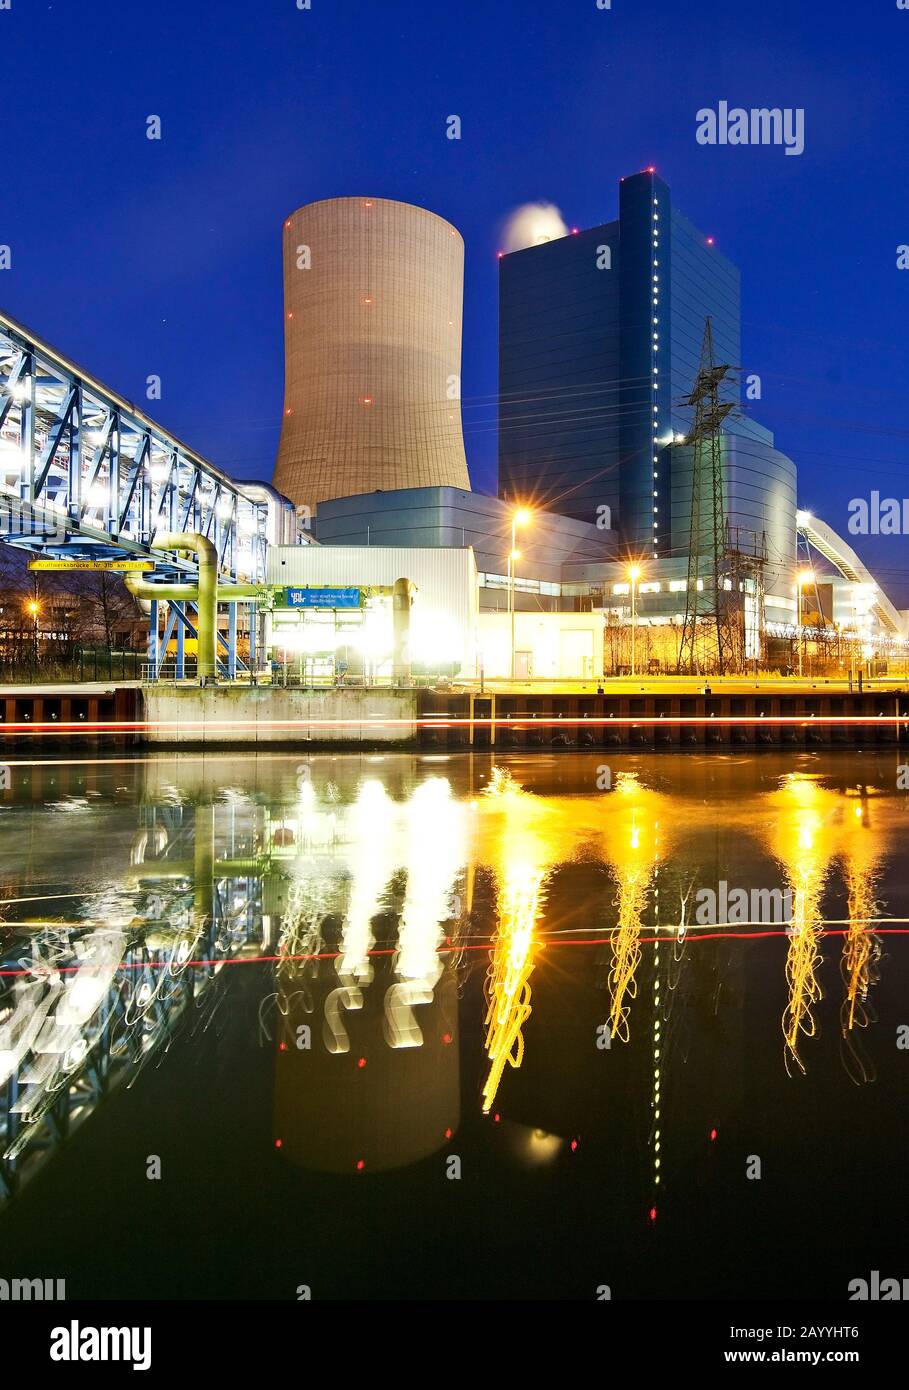 coal-fired power stations Datteln 4 at Datteln-Hamm-Chanel at blue our, Germany, North Rhine-Westphalia, Ruhr Area, Datteln Stock Photo